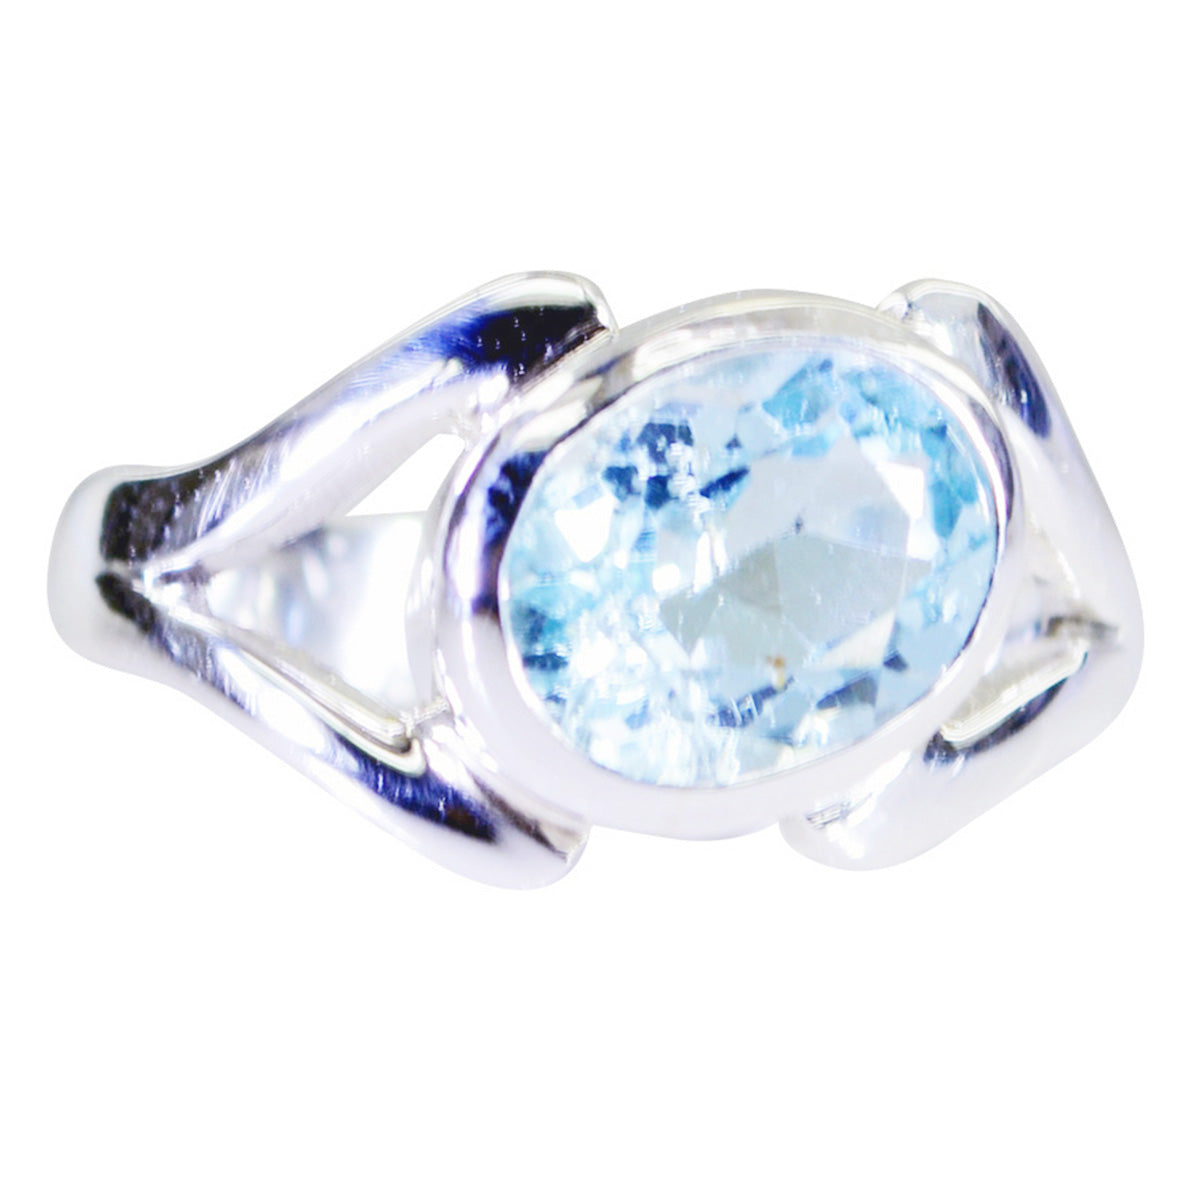 Fine Gemstones Blue Topaz Solid Silver Rings Jewelry Making Tools